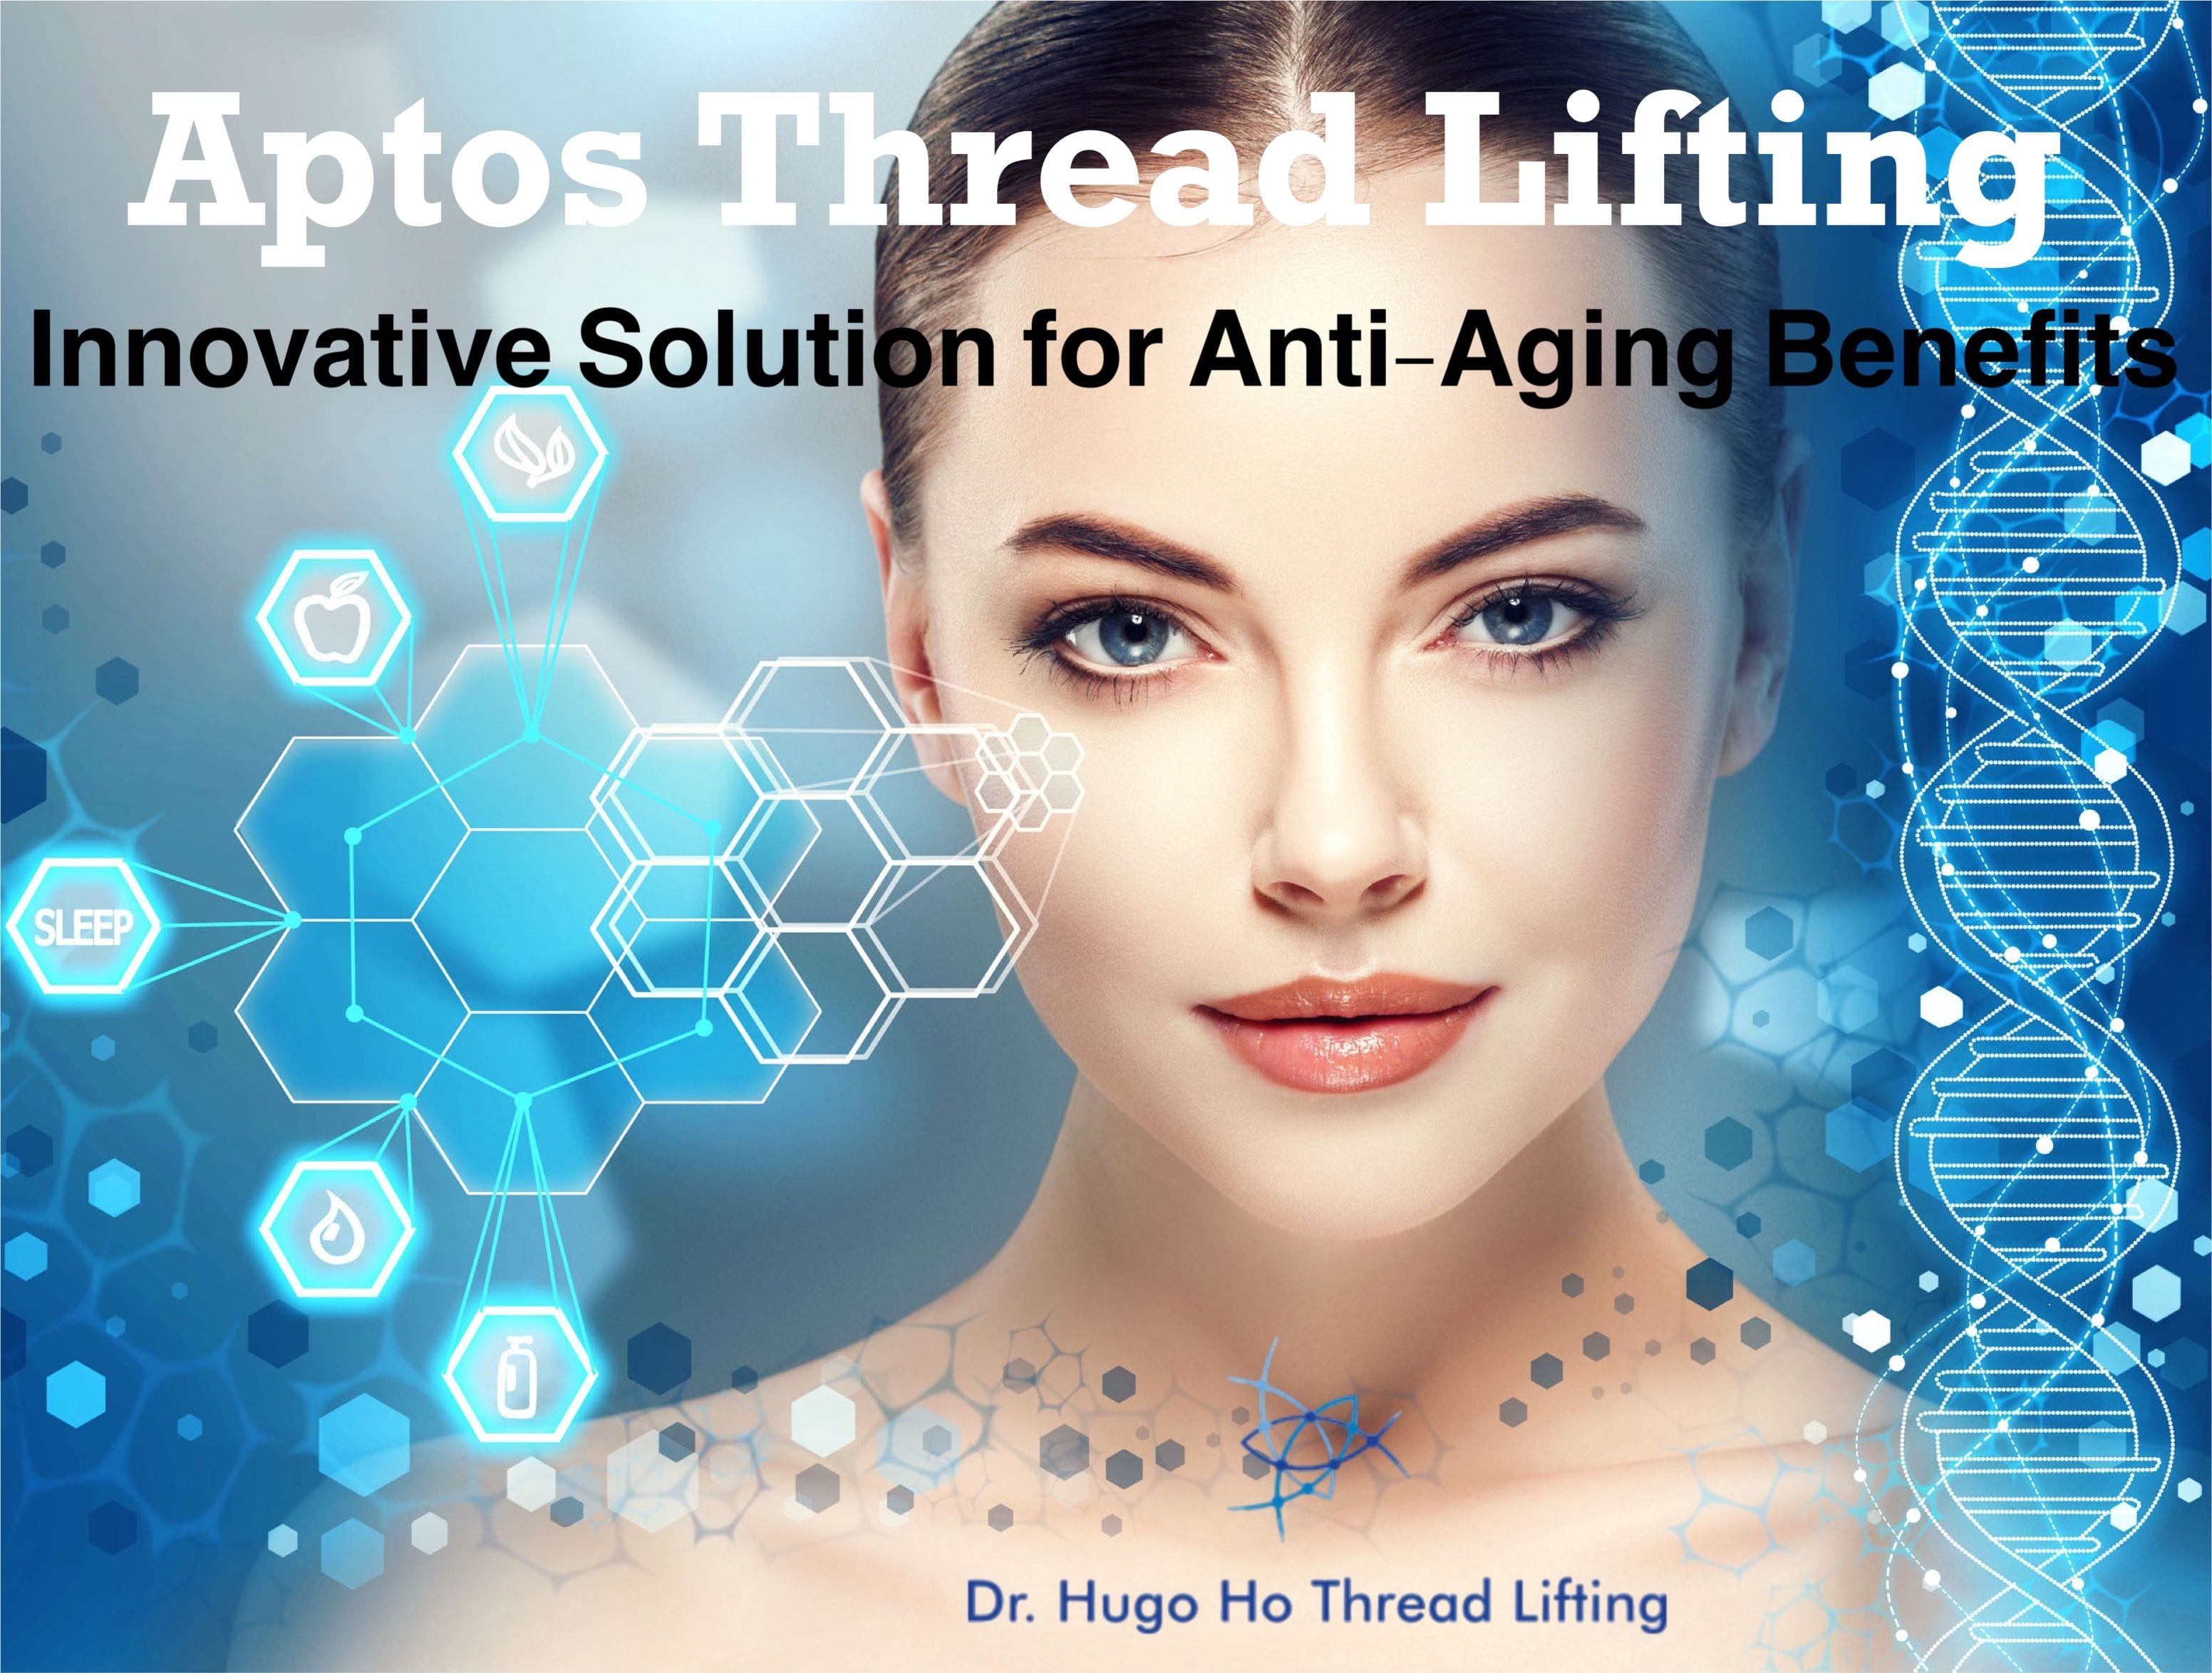 Aptos Thread Lifting: An Innovative Solution for Anti-Aging Benefits